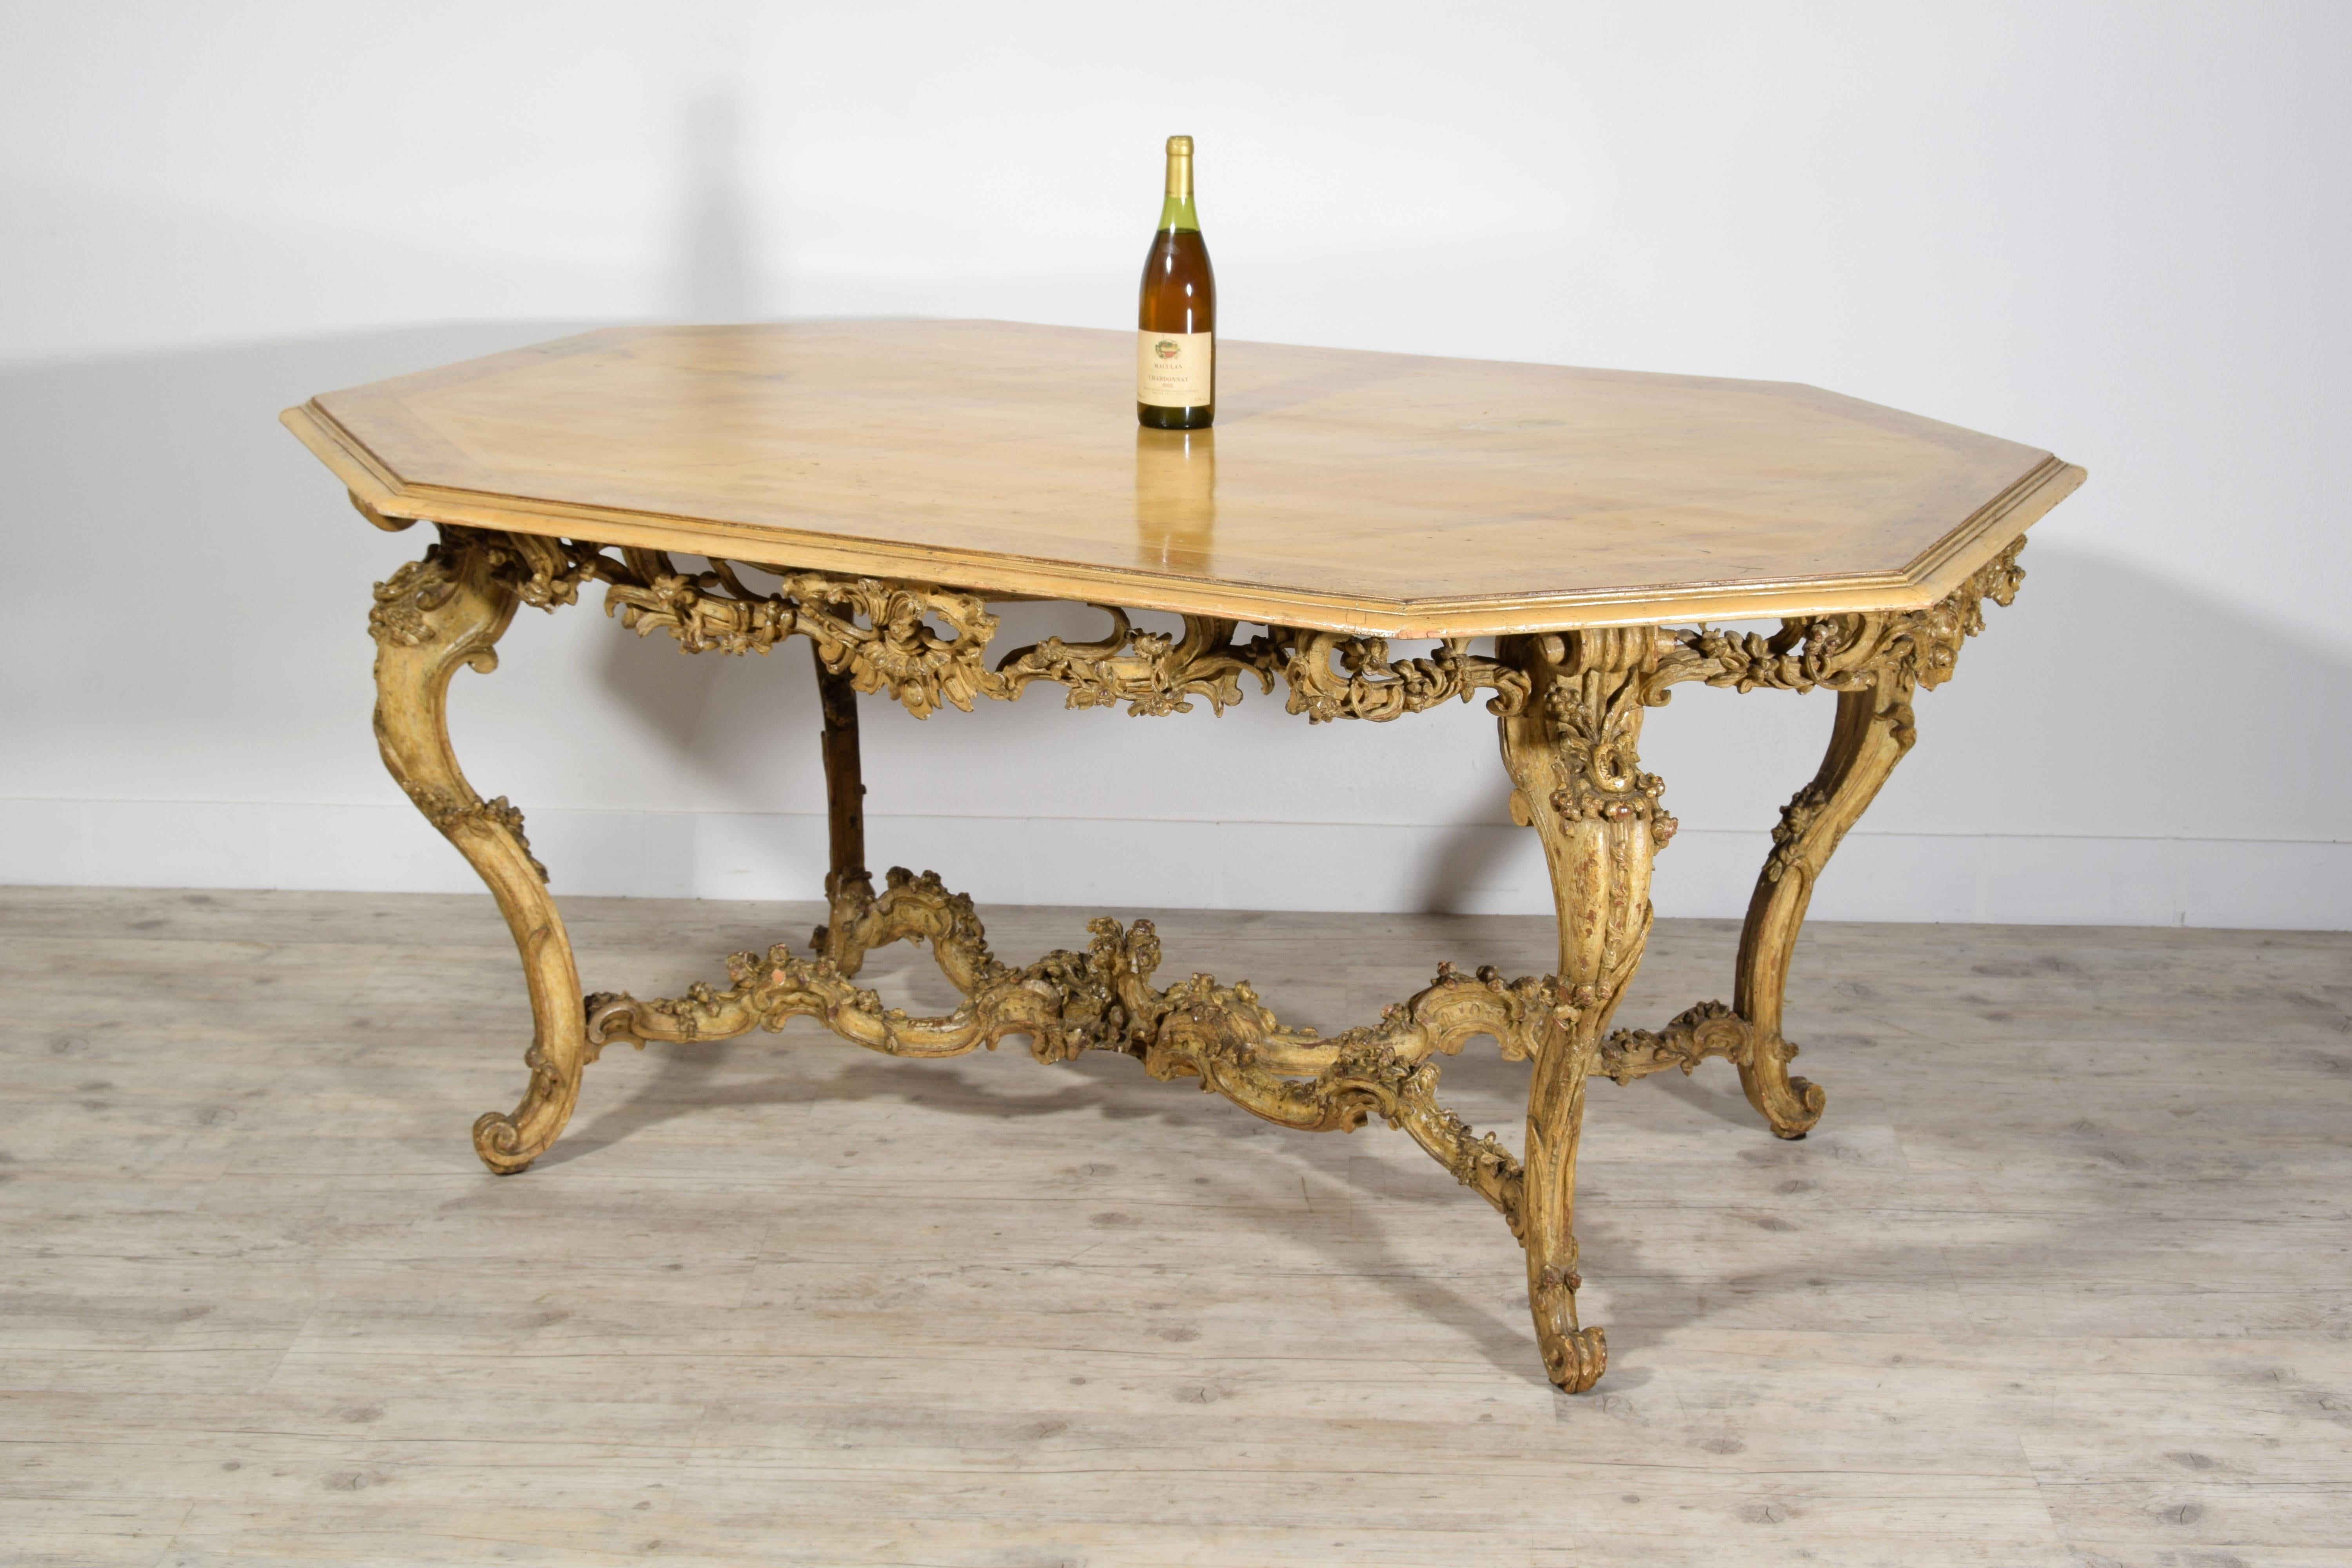 Italian Baroque Carved Gilt and Lacquered Wood Center Table, 18th Century For Sale 8